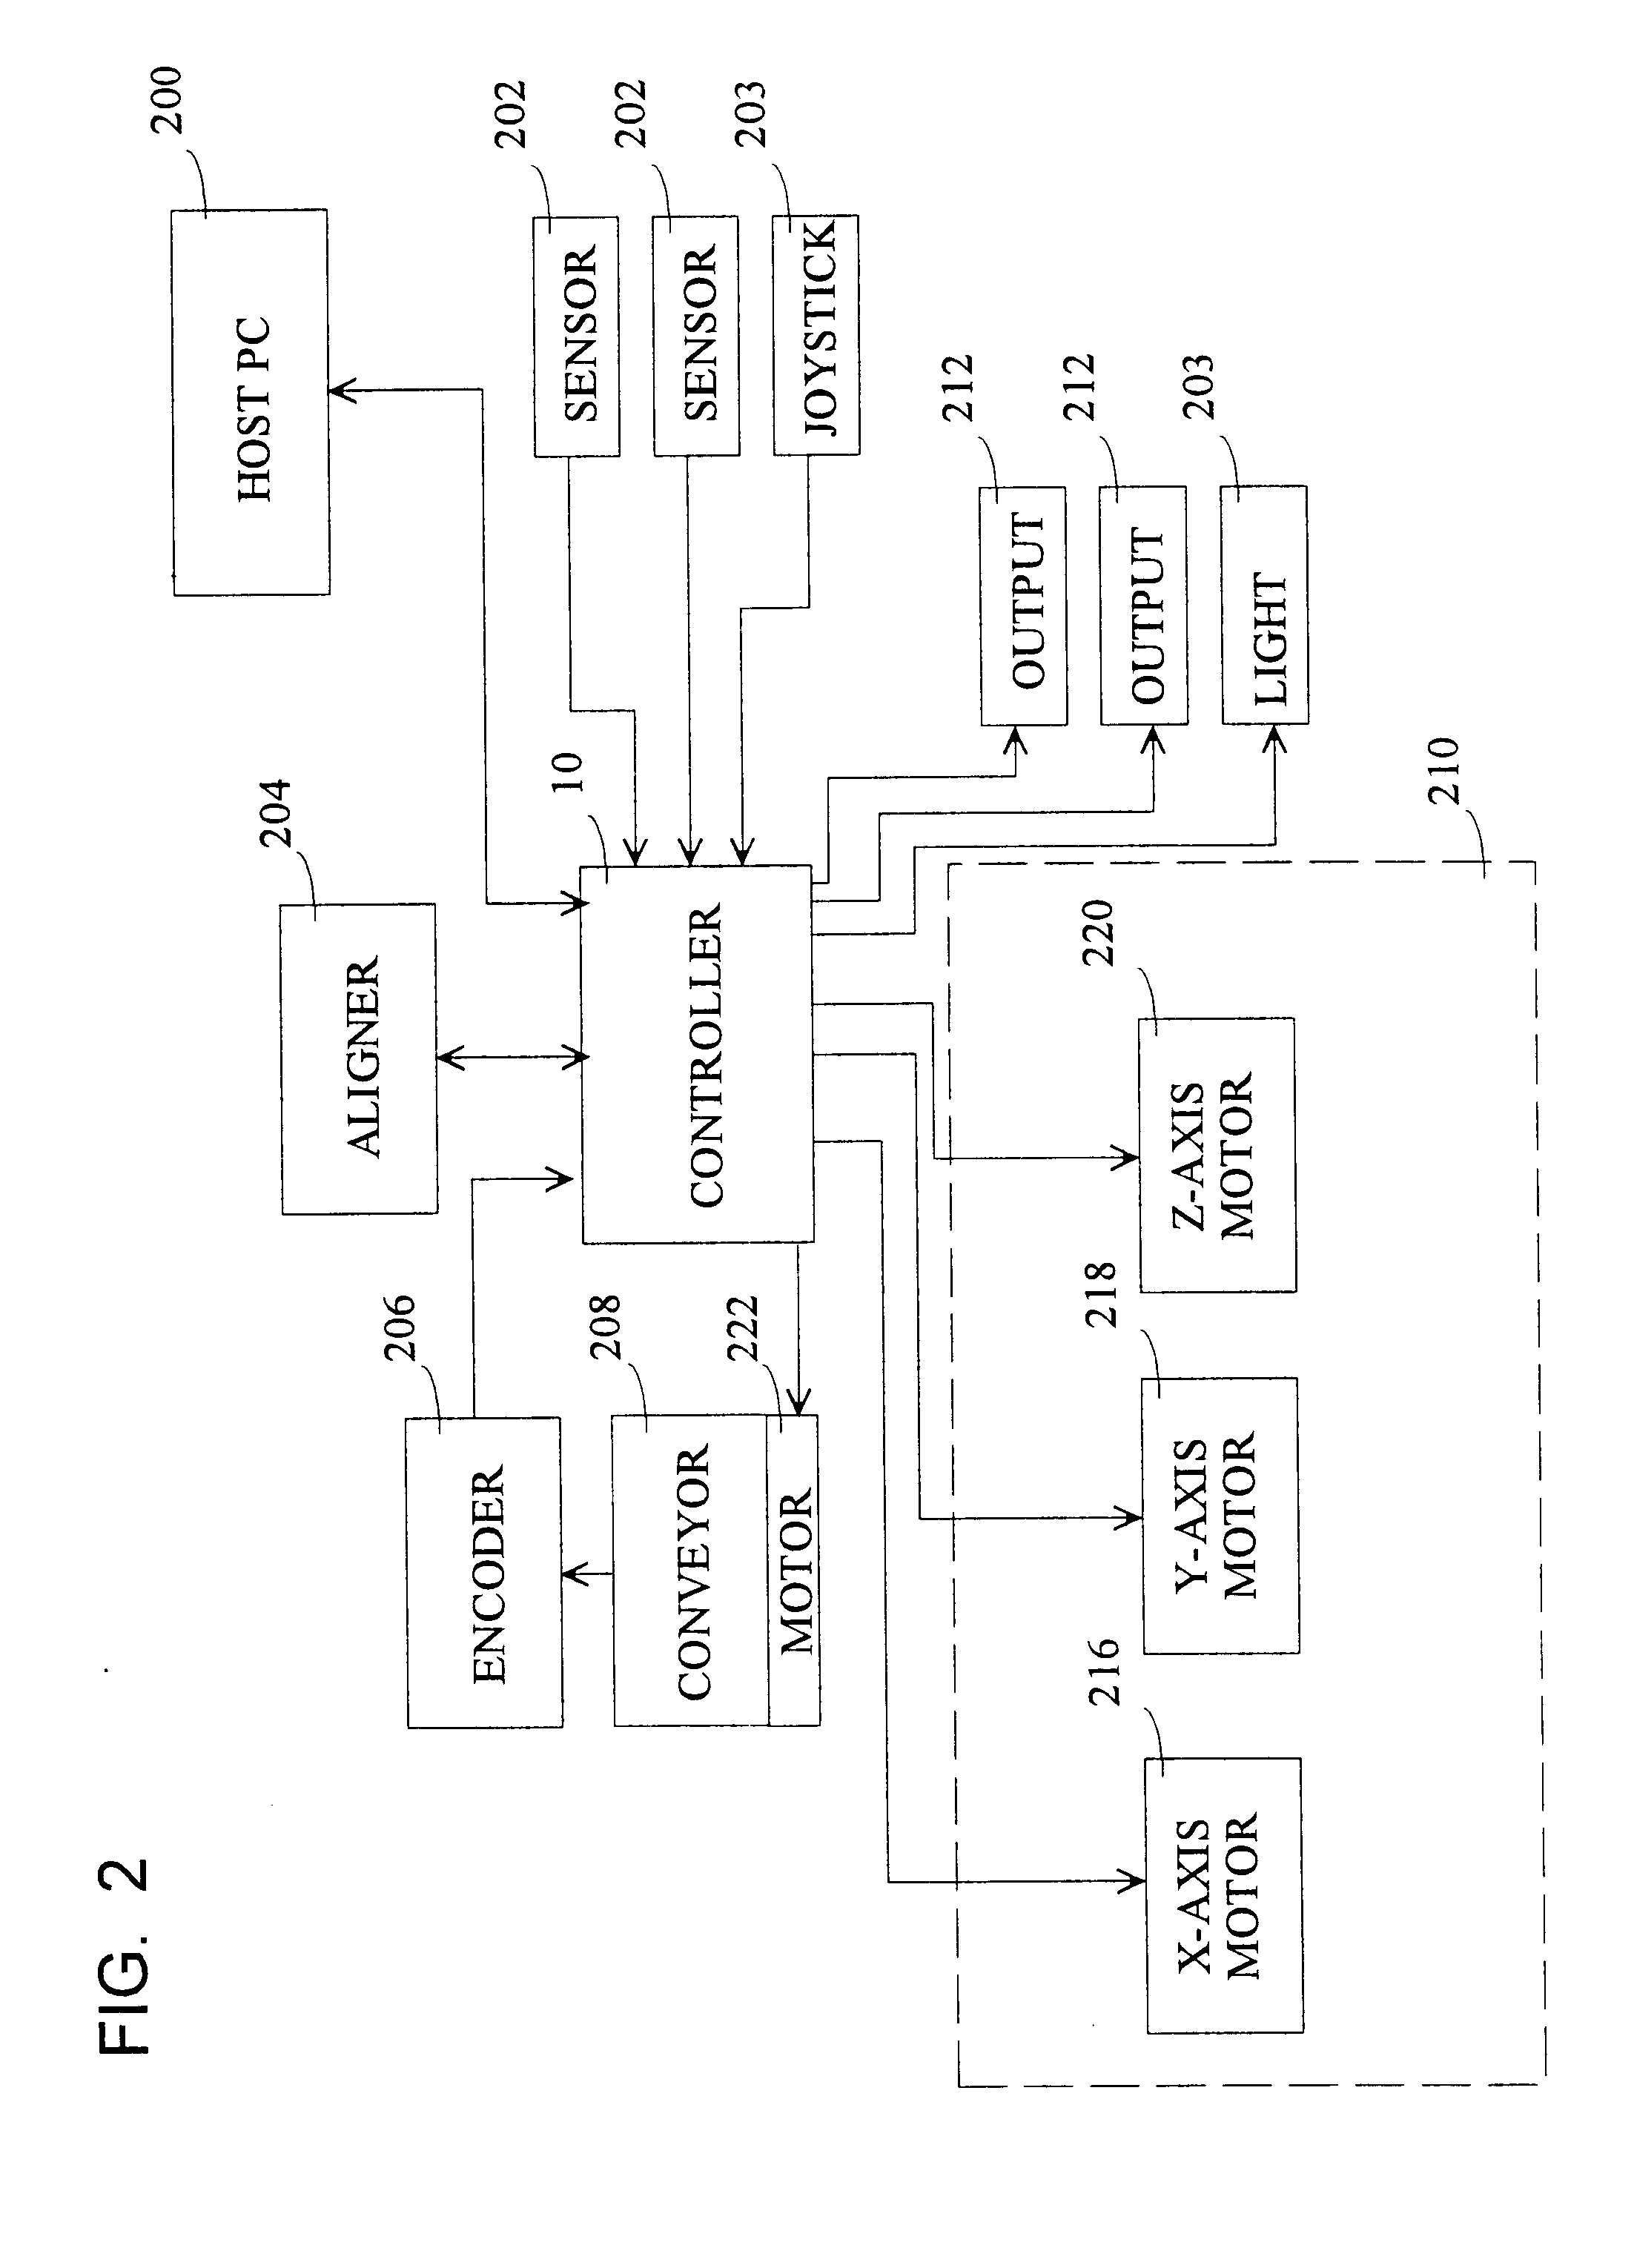 Multiple axis modular controller and method of operating same